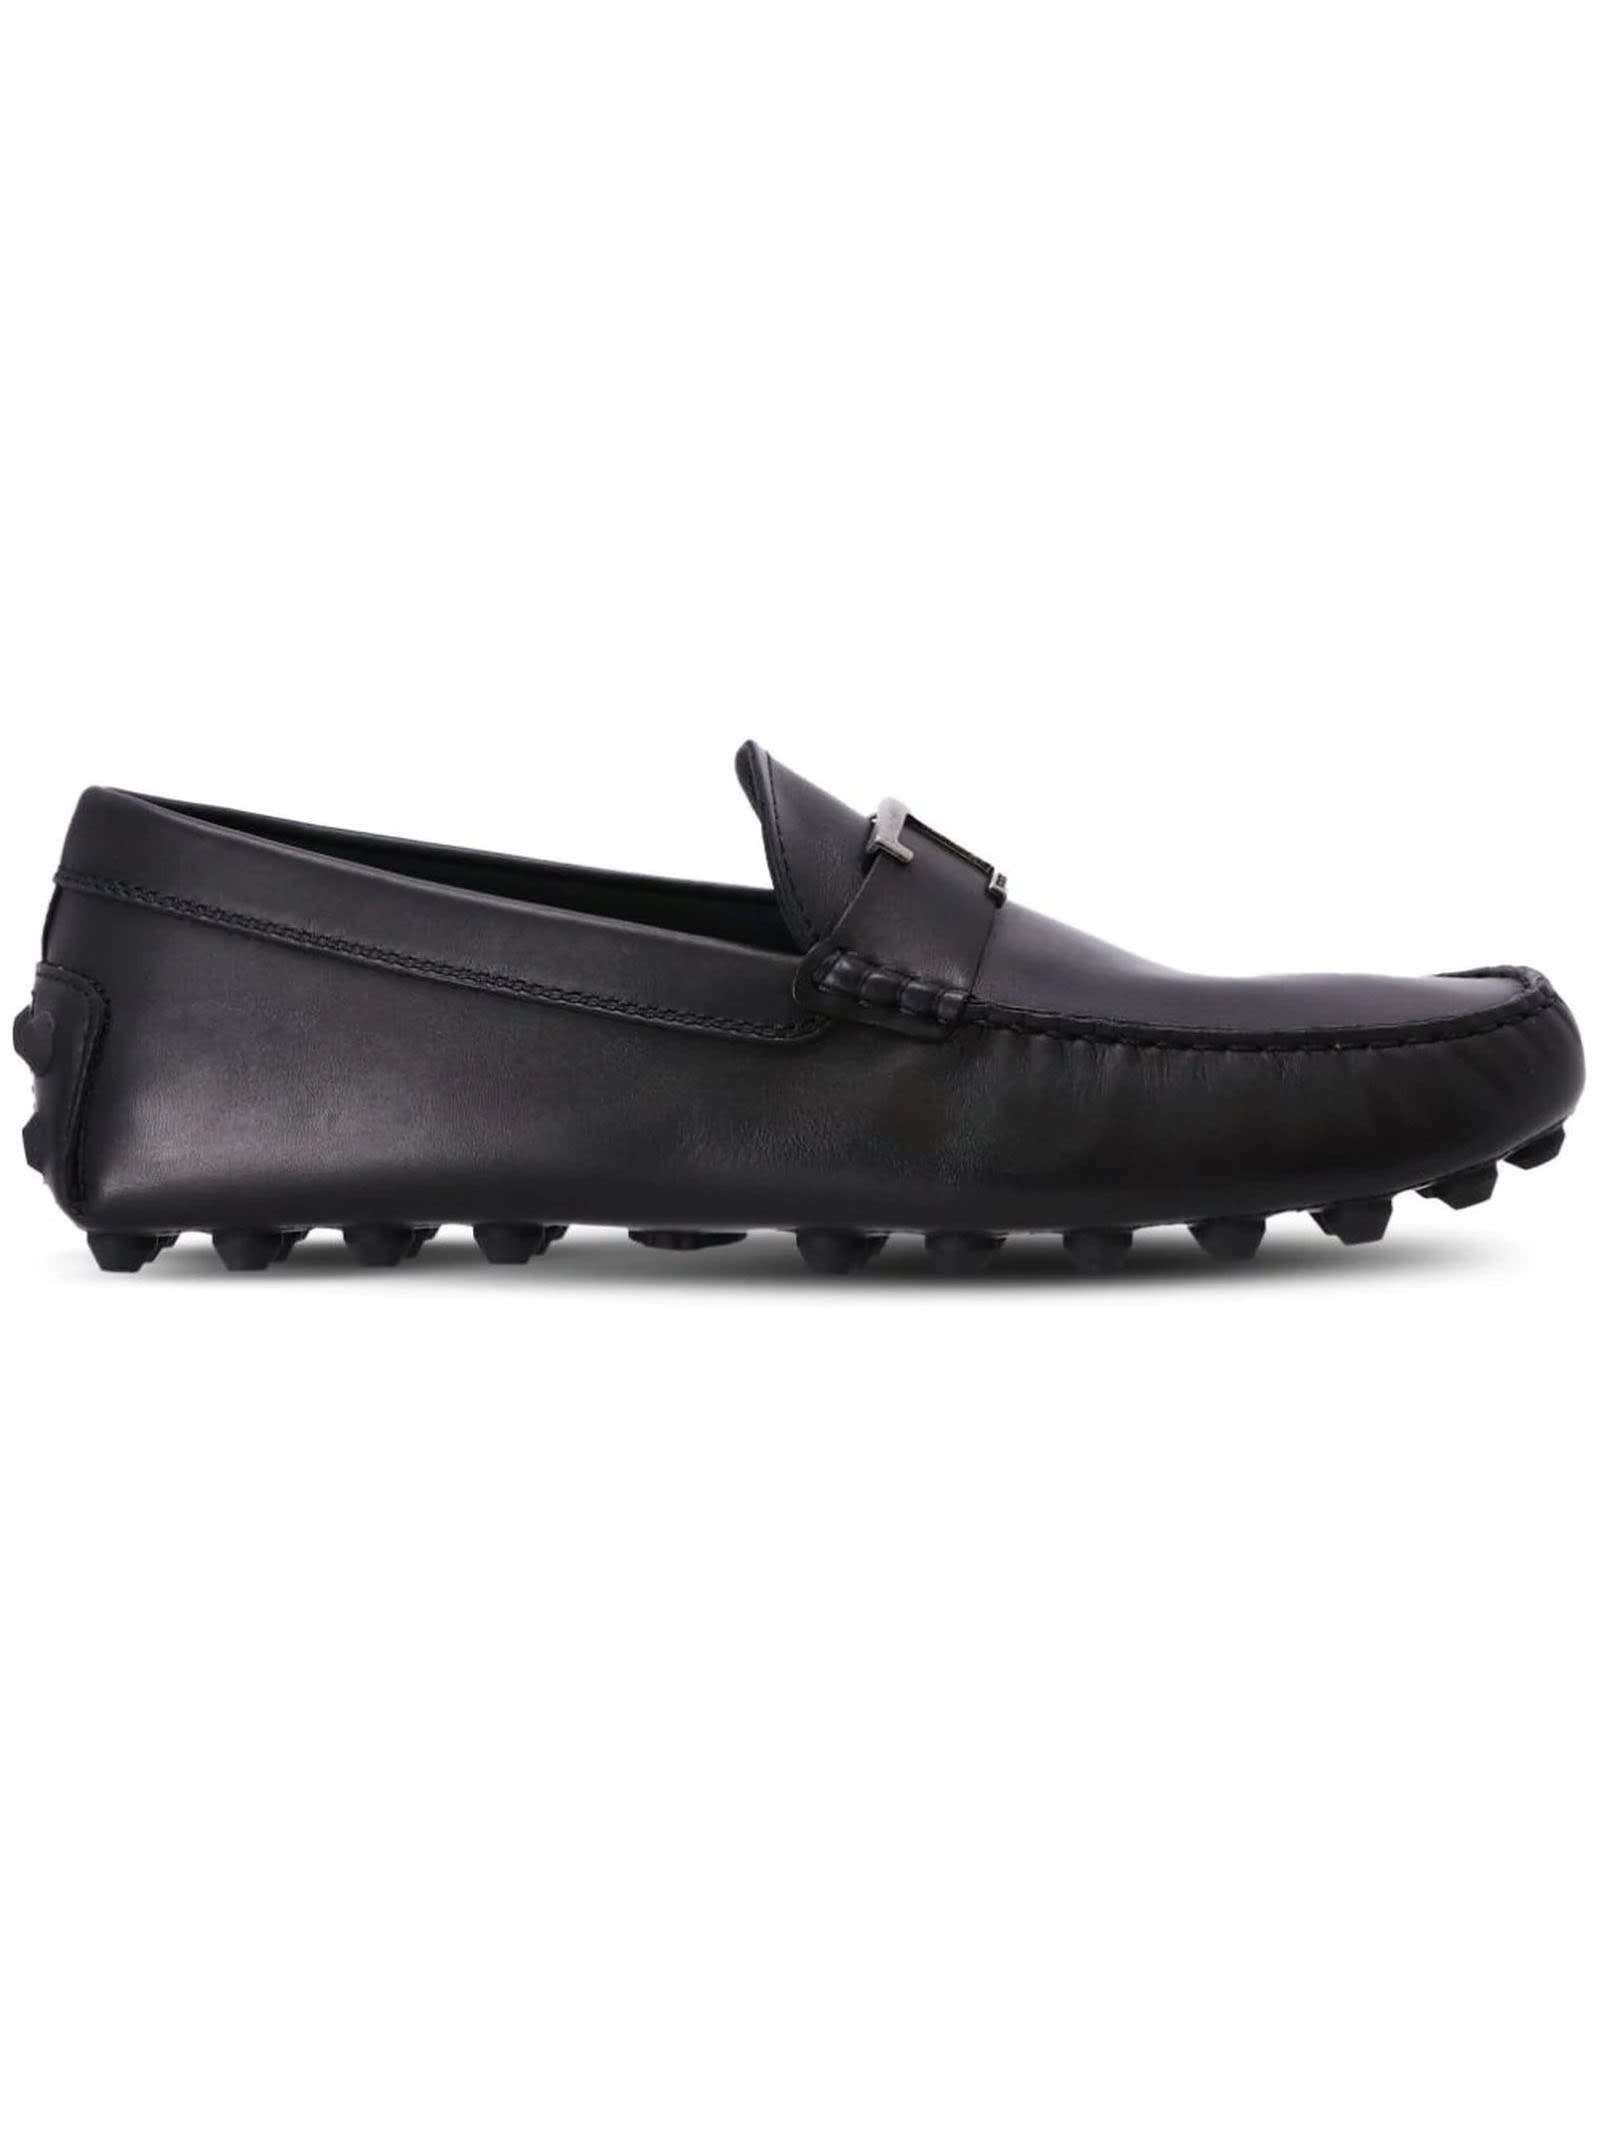 Tods Flat Shoes Black